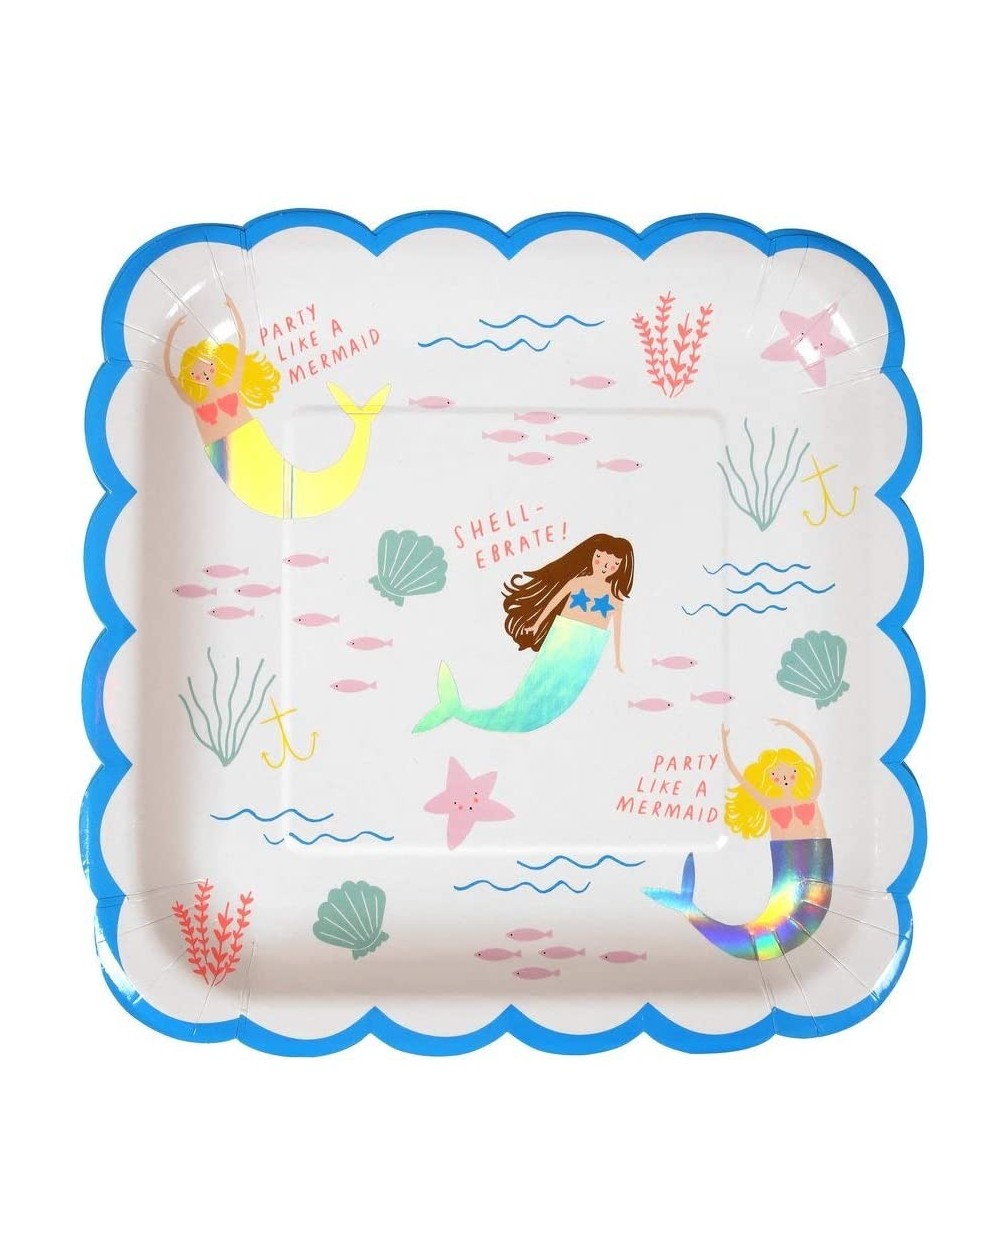 Party Tableware Mermaid Princess Paper Plates - Disposable Party Supplies- For Birthday Celebrations- Baby Showers- Parties f...